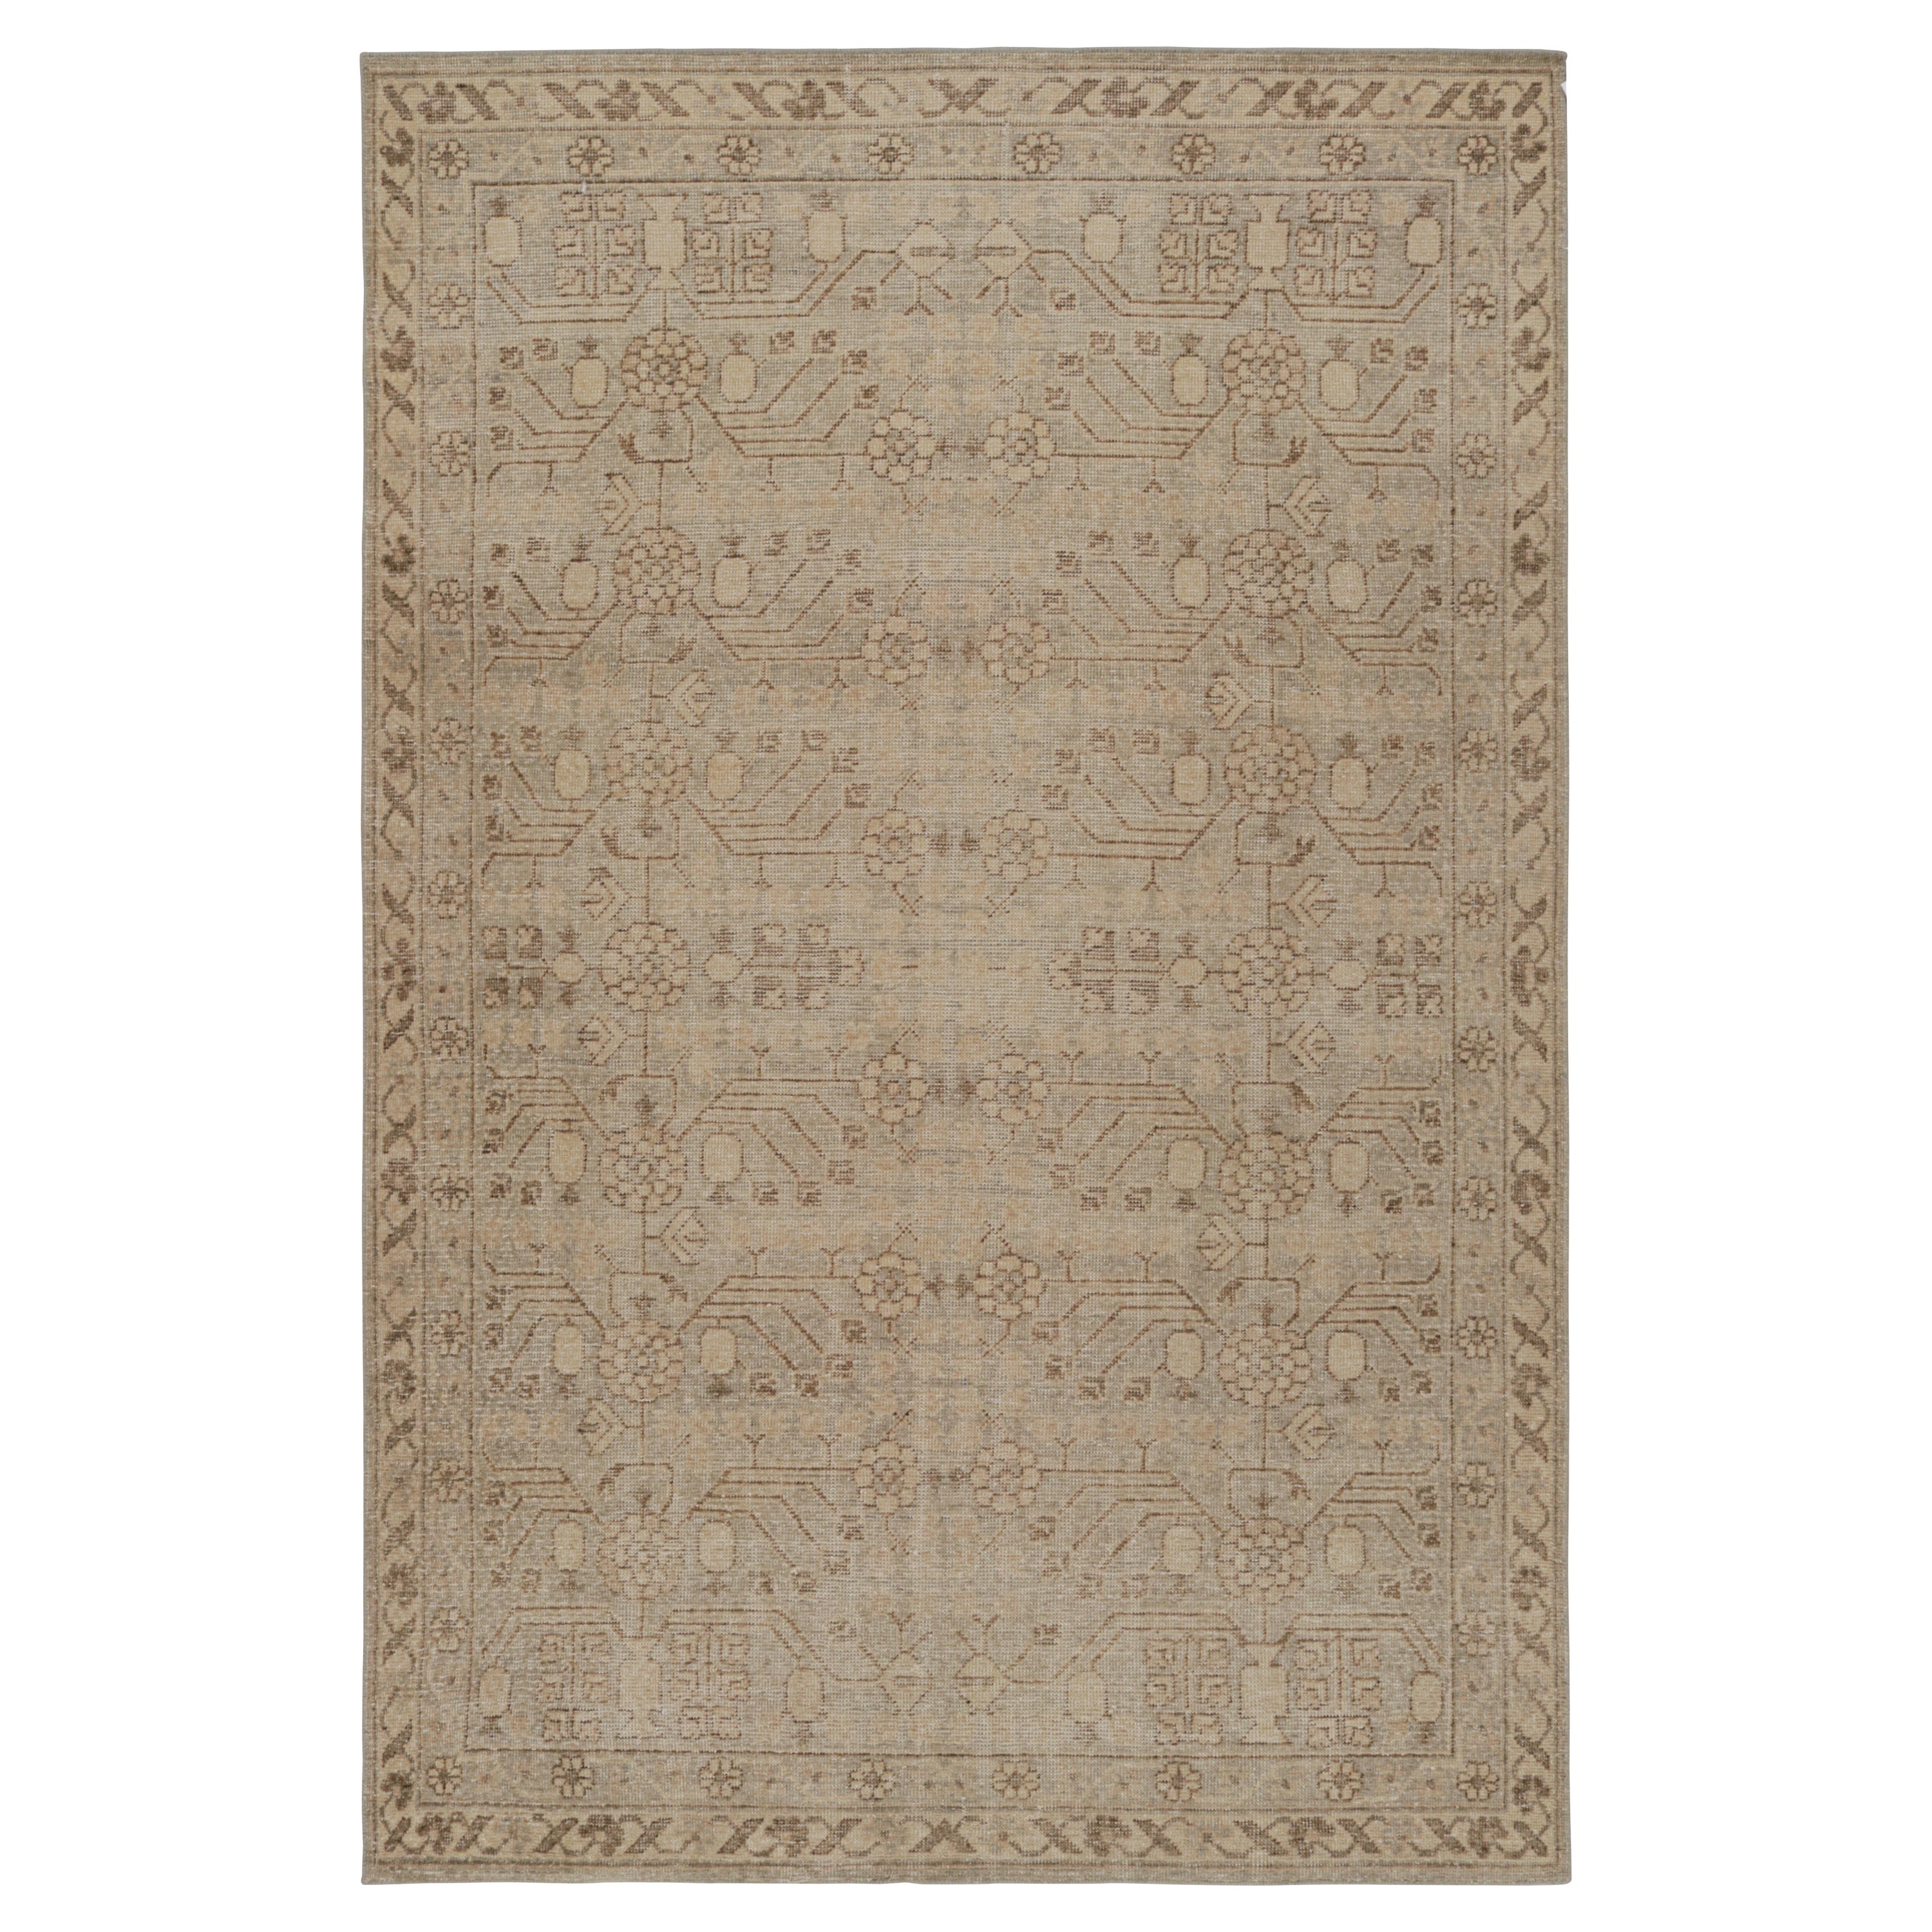 Rug & Kilim’s Khotan Samarkand Style Rug with Floral and Pomegranate Patterns For Sale